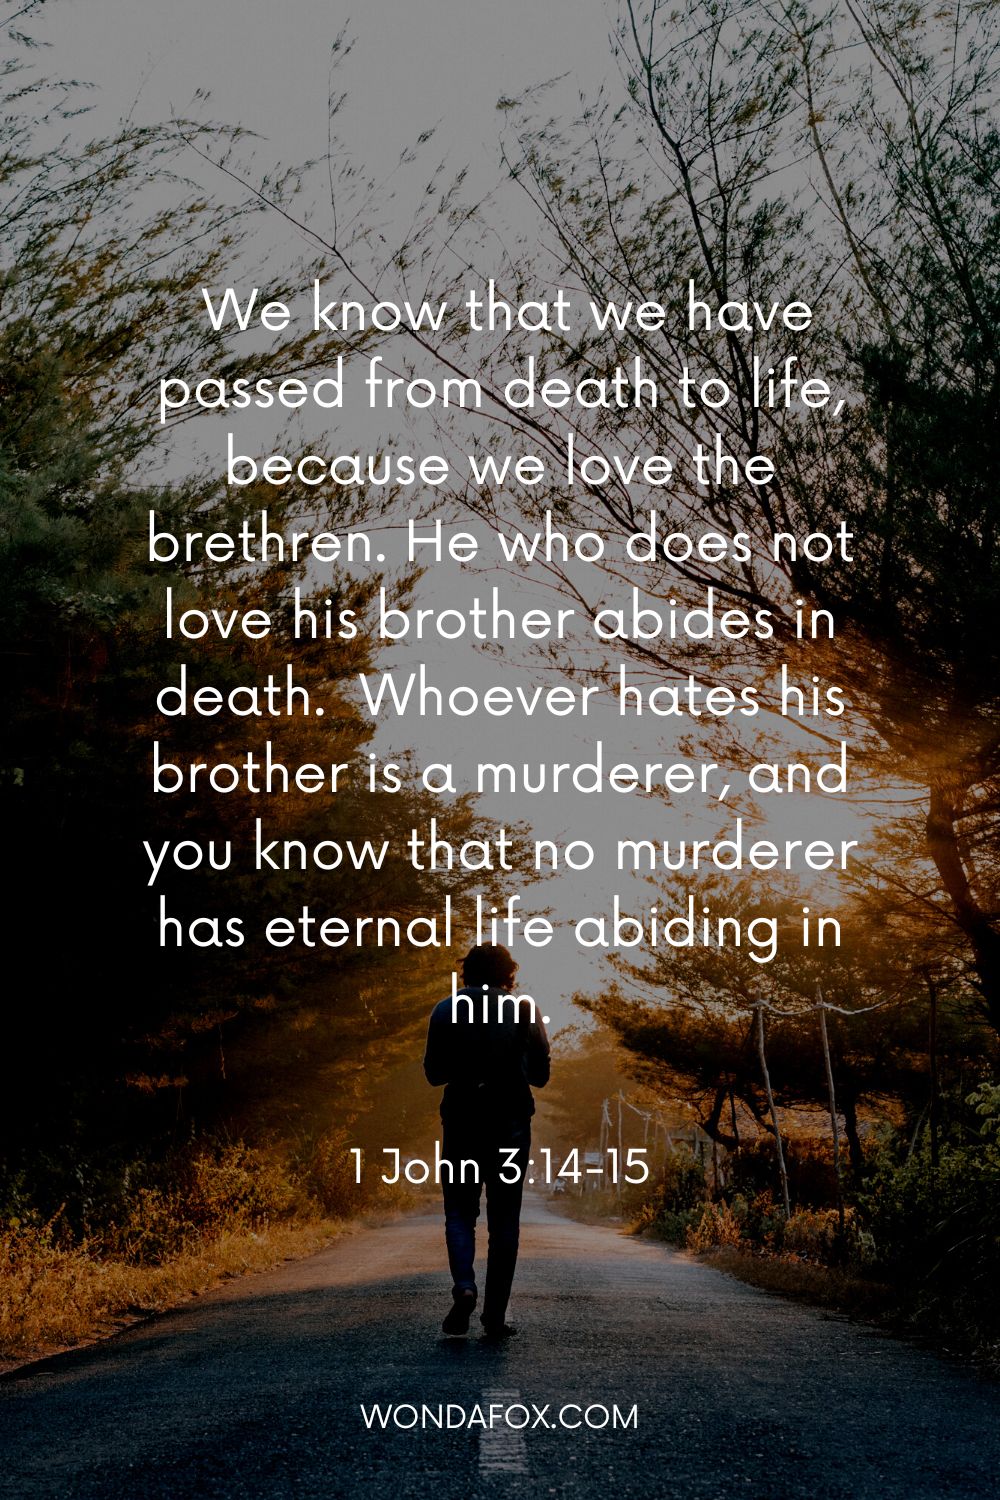  We know that we have passed from death to life, because we love the brethren. He who does not love his brother abides in death.  Whoever hates his brother is a murderer, and you know that no murderer has eternal life abiding in him.